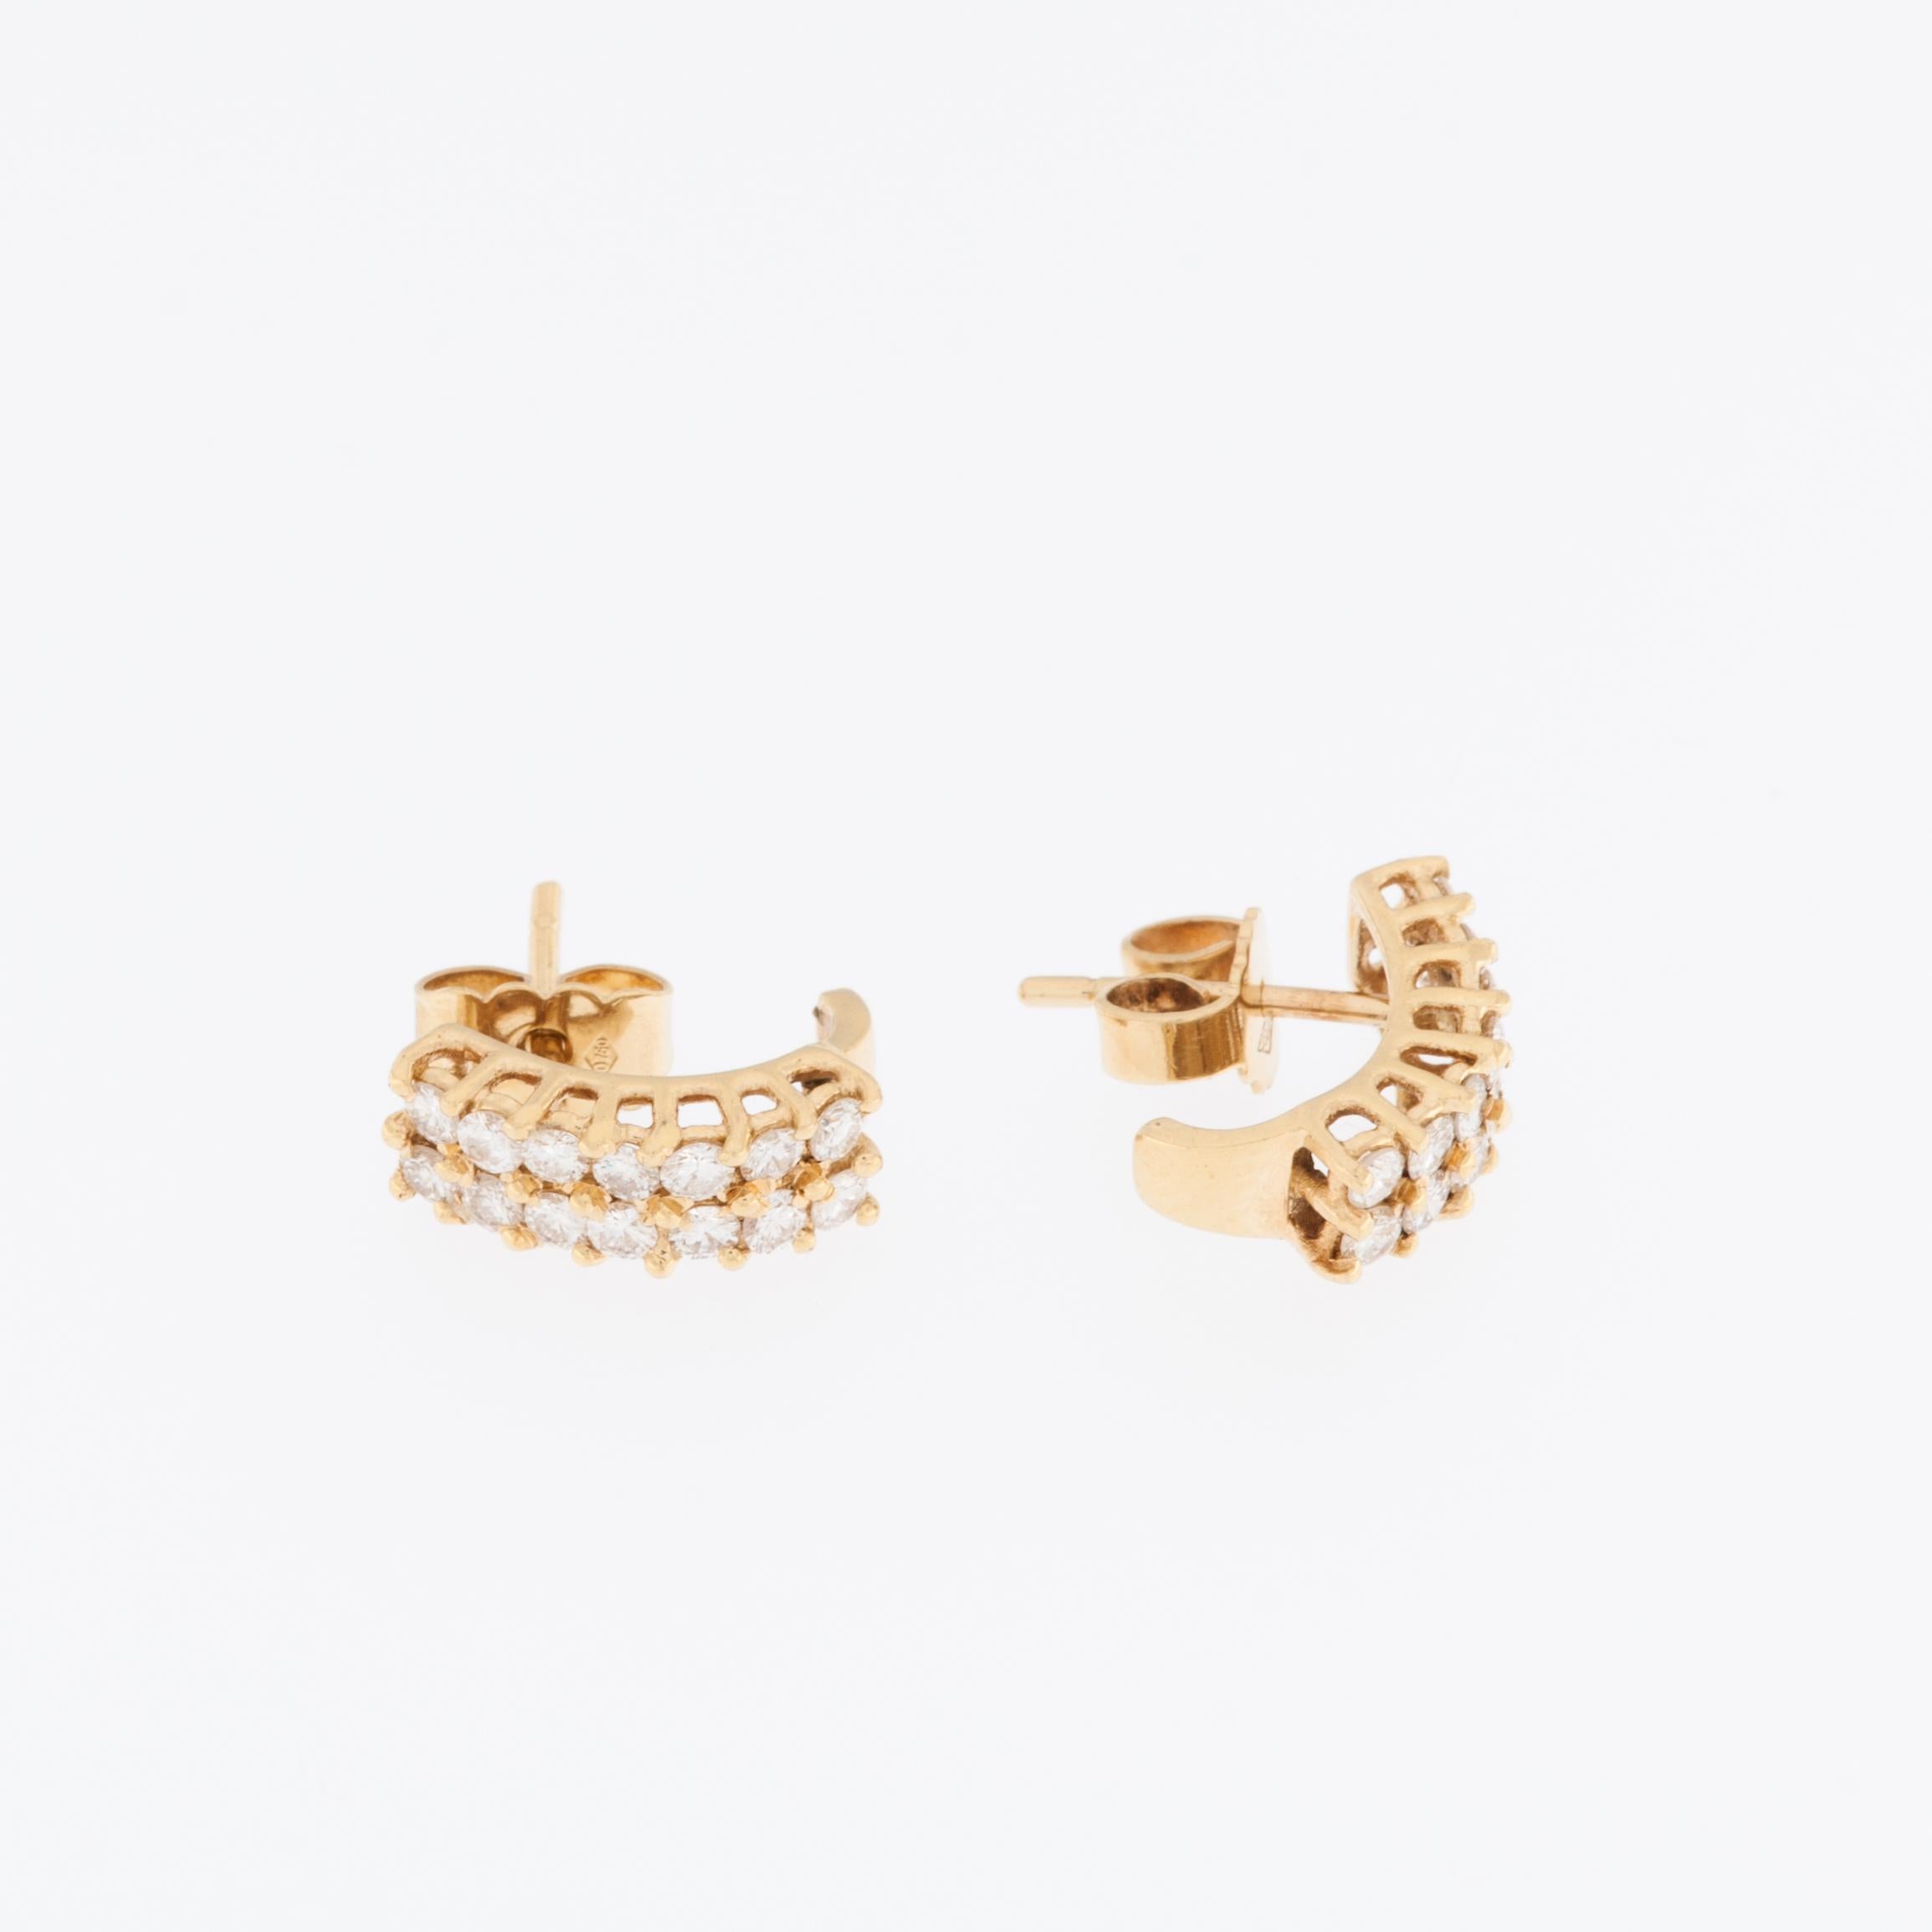 Vintage French 18kt Yellow Gold Earrings with Diamonds are a stunning and timeless piece of jewelry that combines the elegance of vintage design with the beauty of diamonds and the richness of 18-karat yellow gold. 

These earrings are crafted from